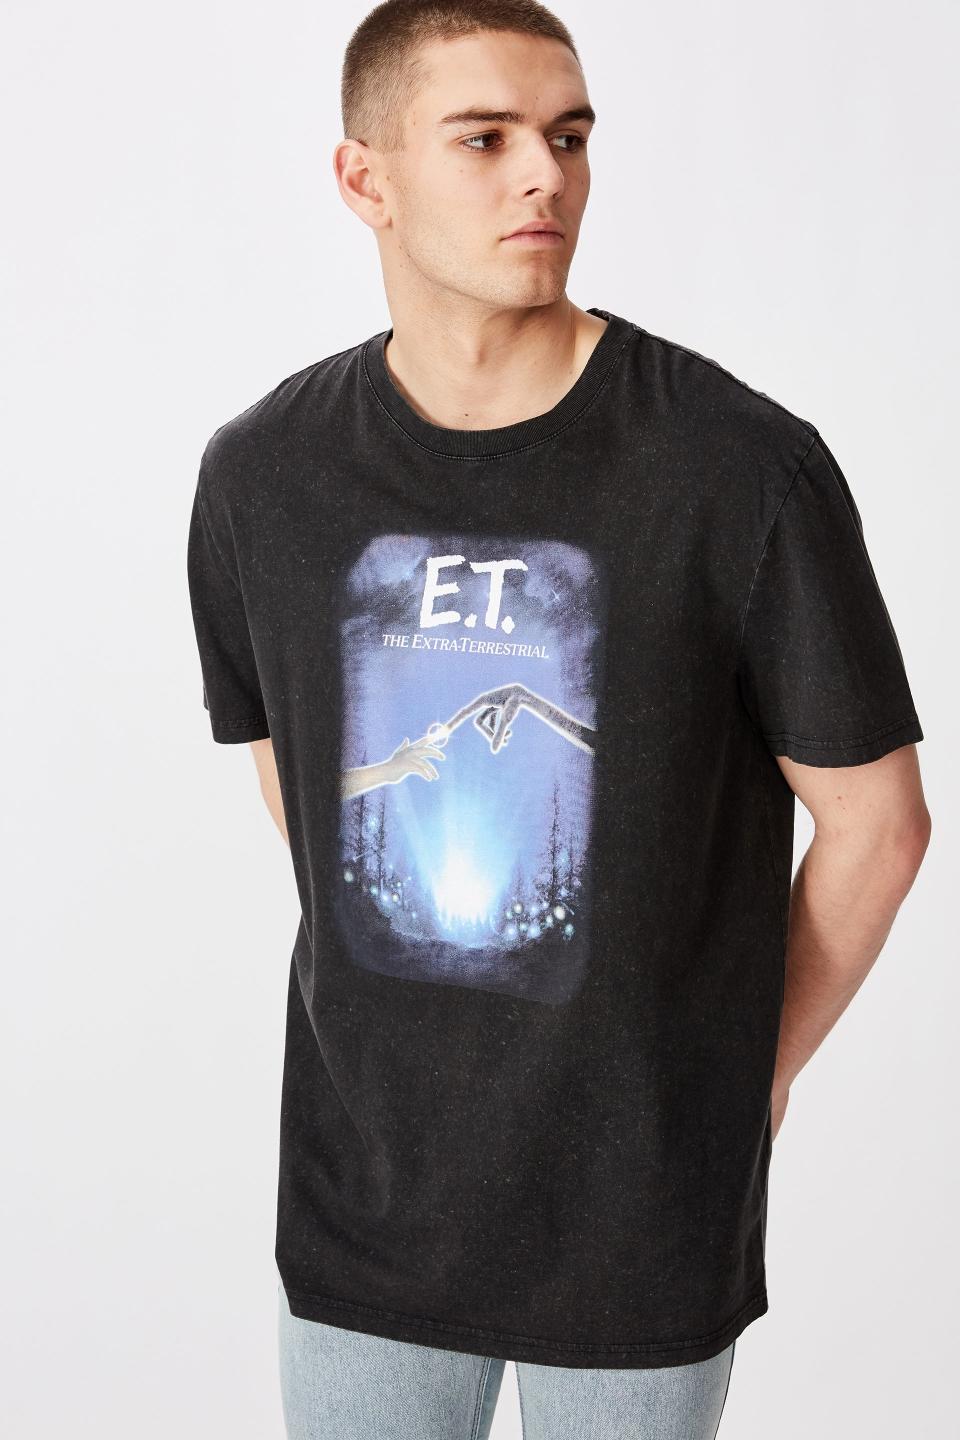 The Factorie Regular License T Shirt in E.T. print, $17.46 (RRP $24.95) from Cotton On. Photo: Cotton On.